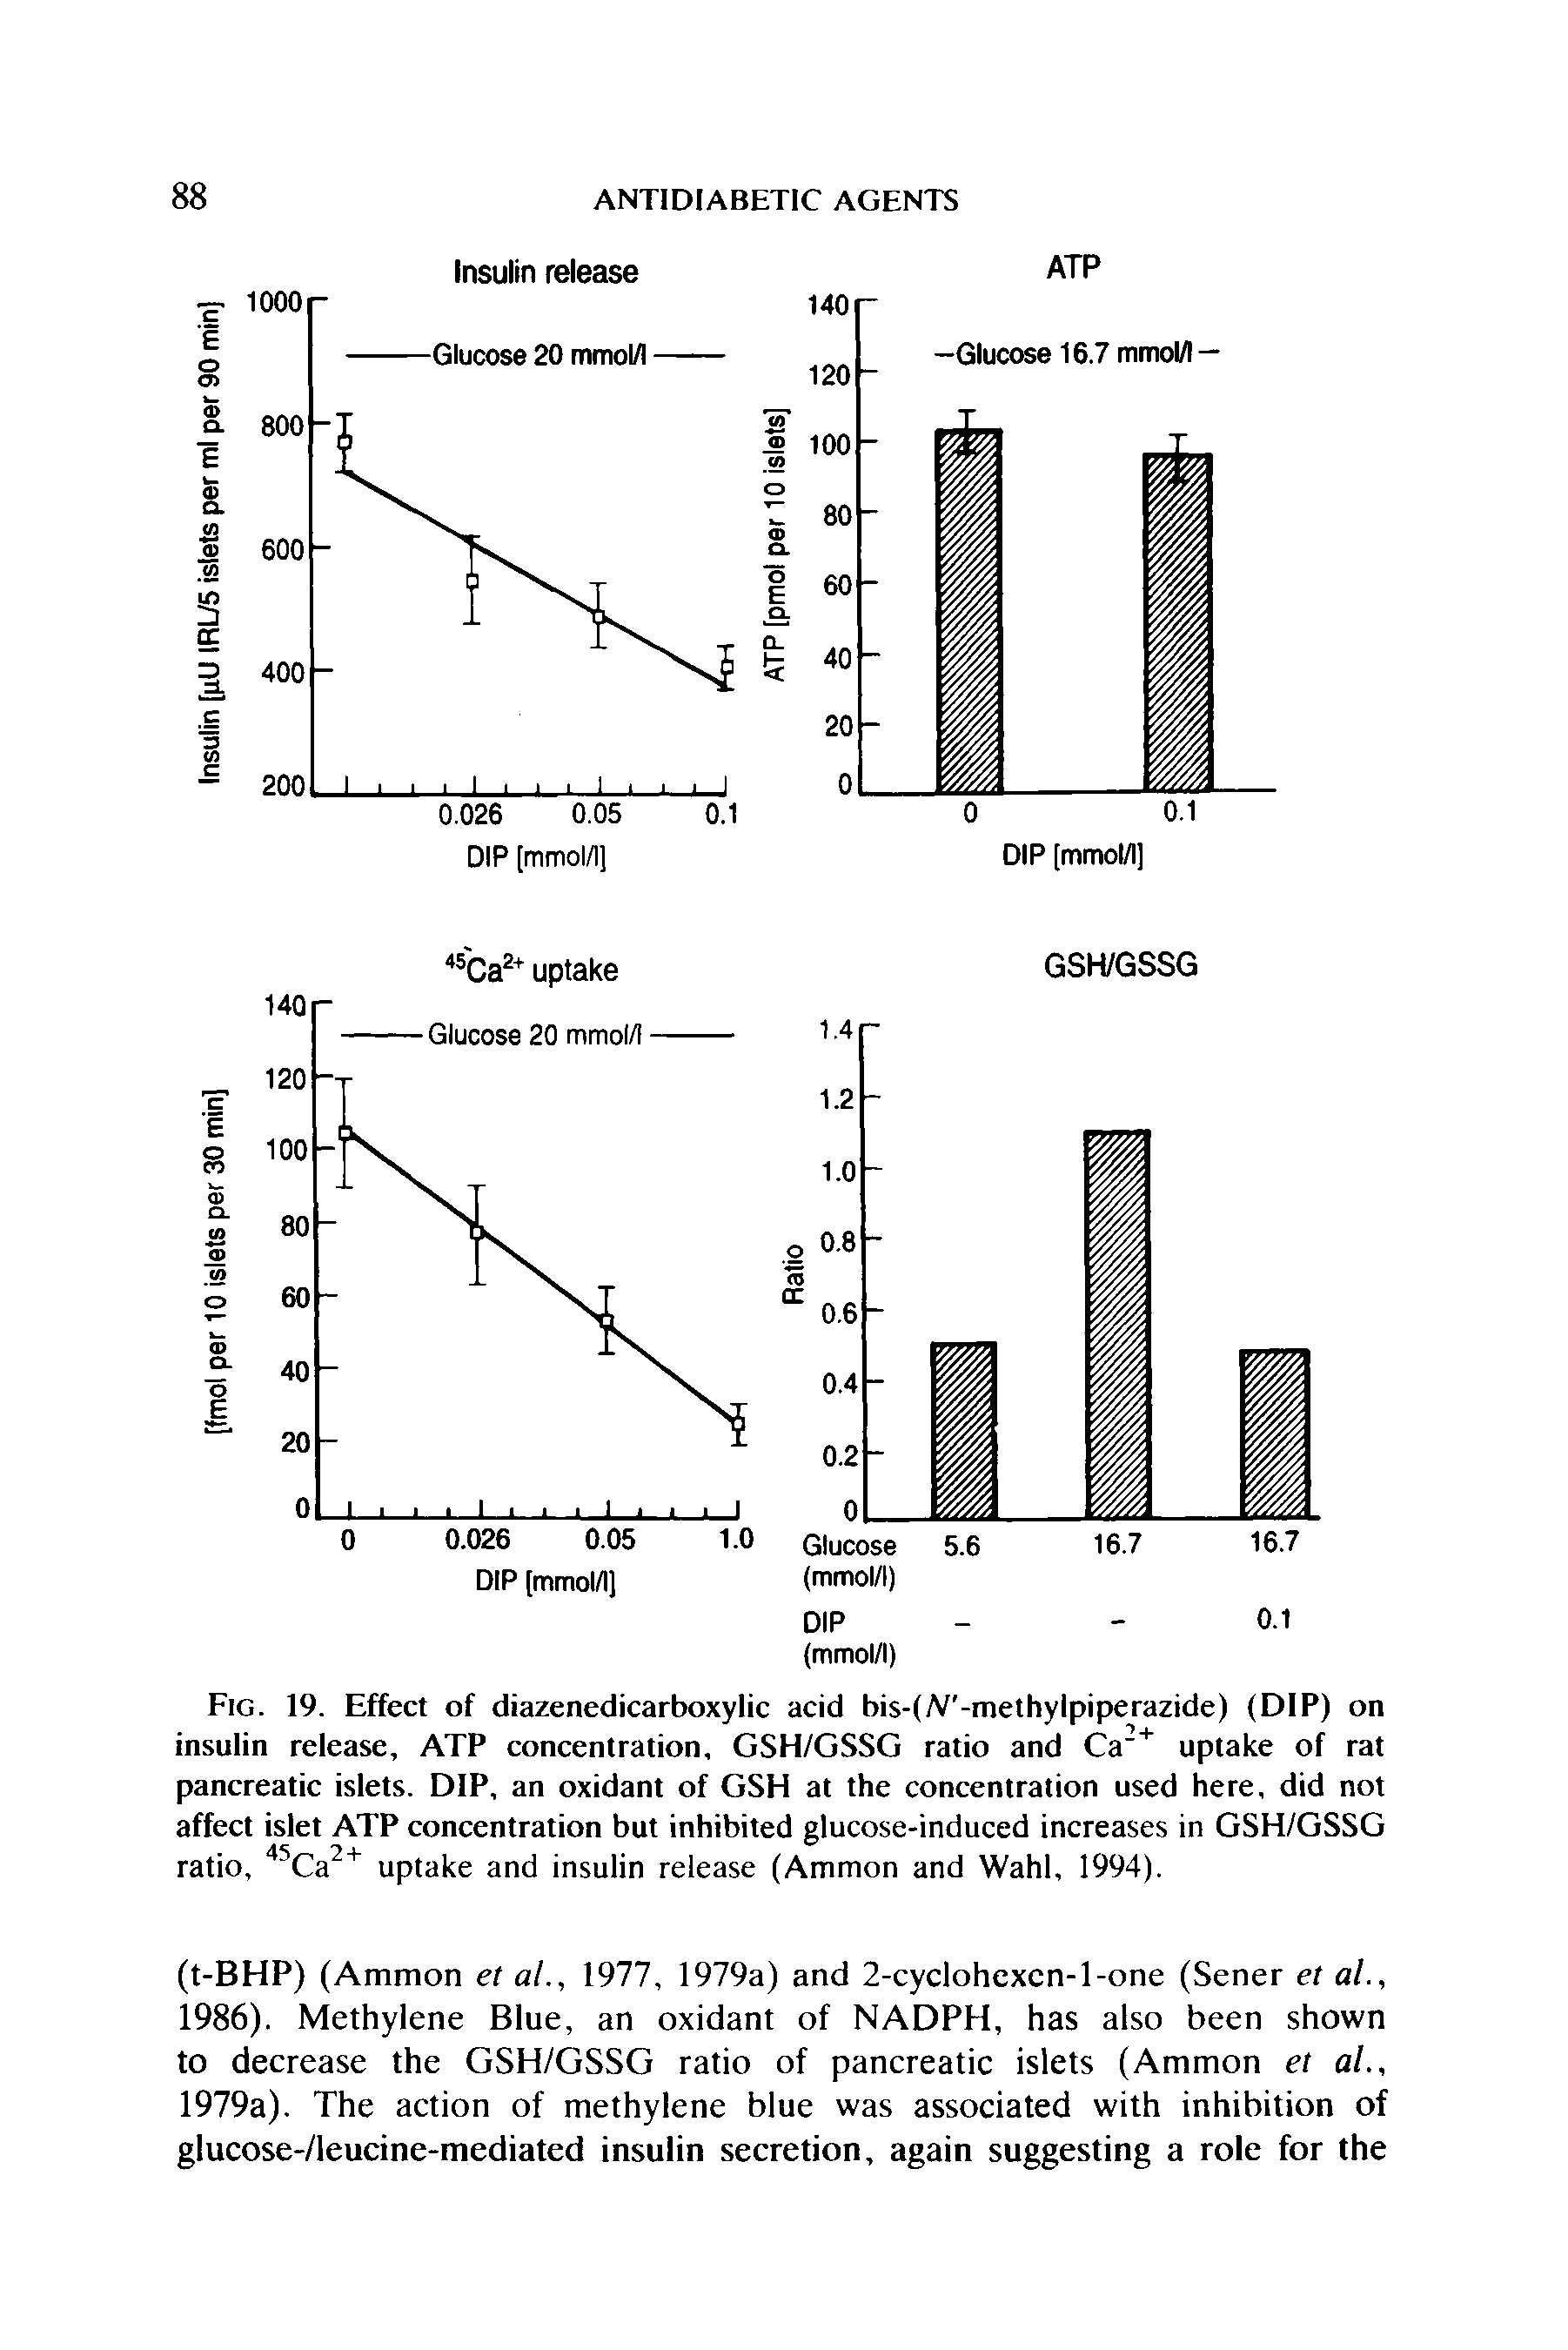 Fig. 19. Effect of diazenedicarboxylic acid bis-(/V -methylpiperazide) (DIP) on insulin release, ATP concentration, GSH/GSSG ratio and Ca"+ uptake of rat pancreatic islets. DIP, an oxidant of GSH at the concentration used here, did not affect islet ATP concentration but inhibited glucose-induced increases in GSH/GSSG ratio, 45Ca2+ uptake and insulin release (Ammon and Wahl, 1994).